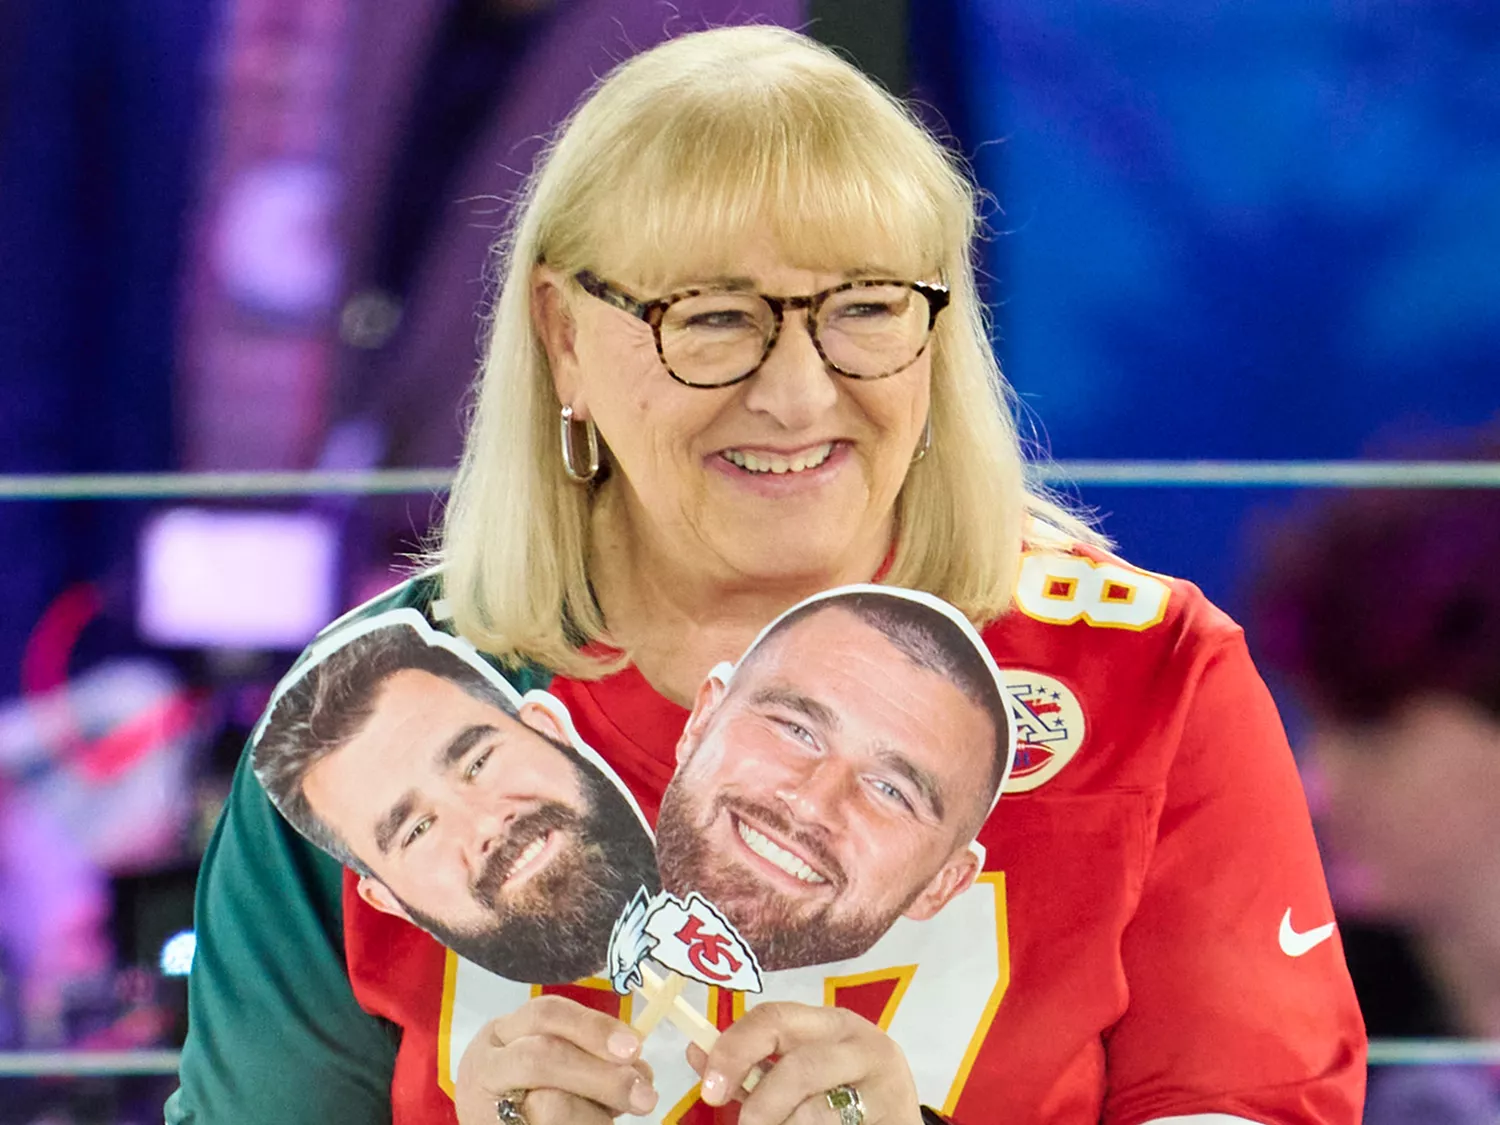 Donna Kelce Recently Posted A Humorous Meme On Social Media Playfully Commenting On Travis 